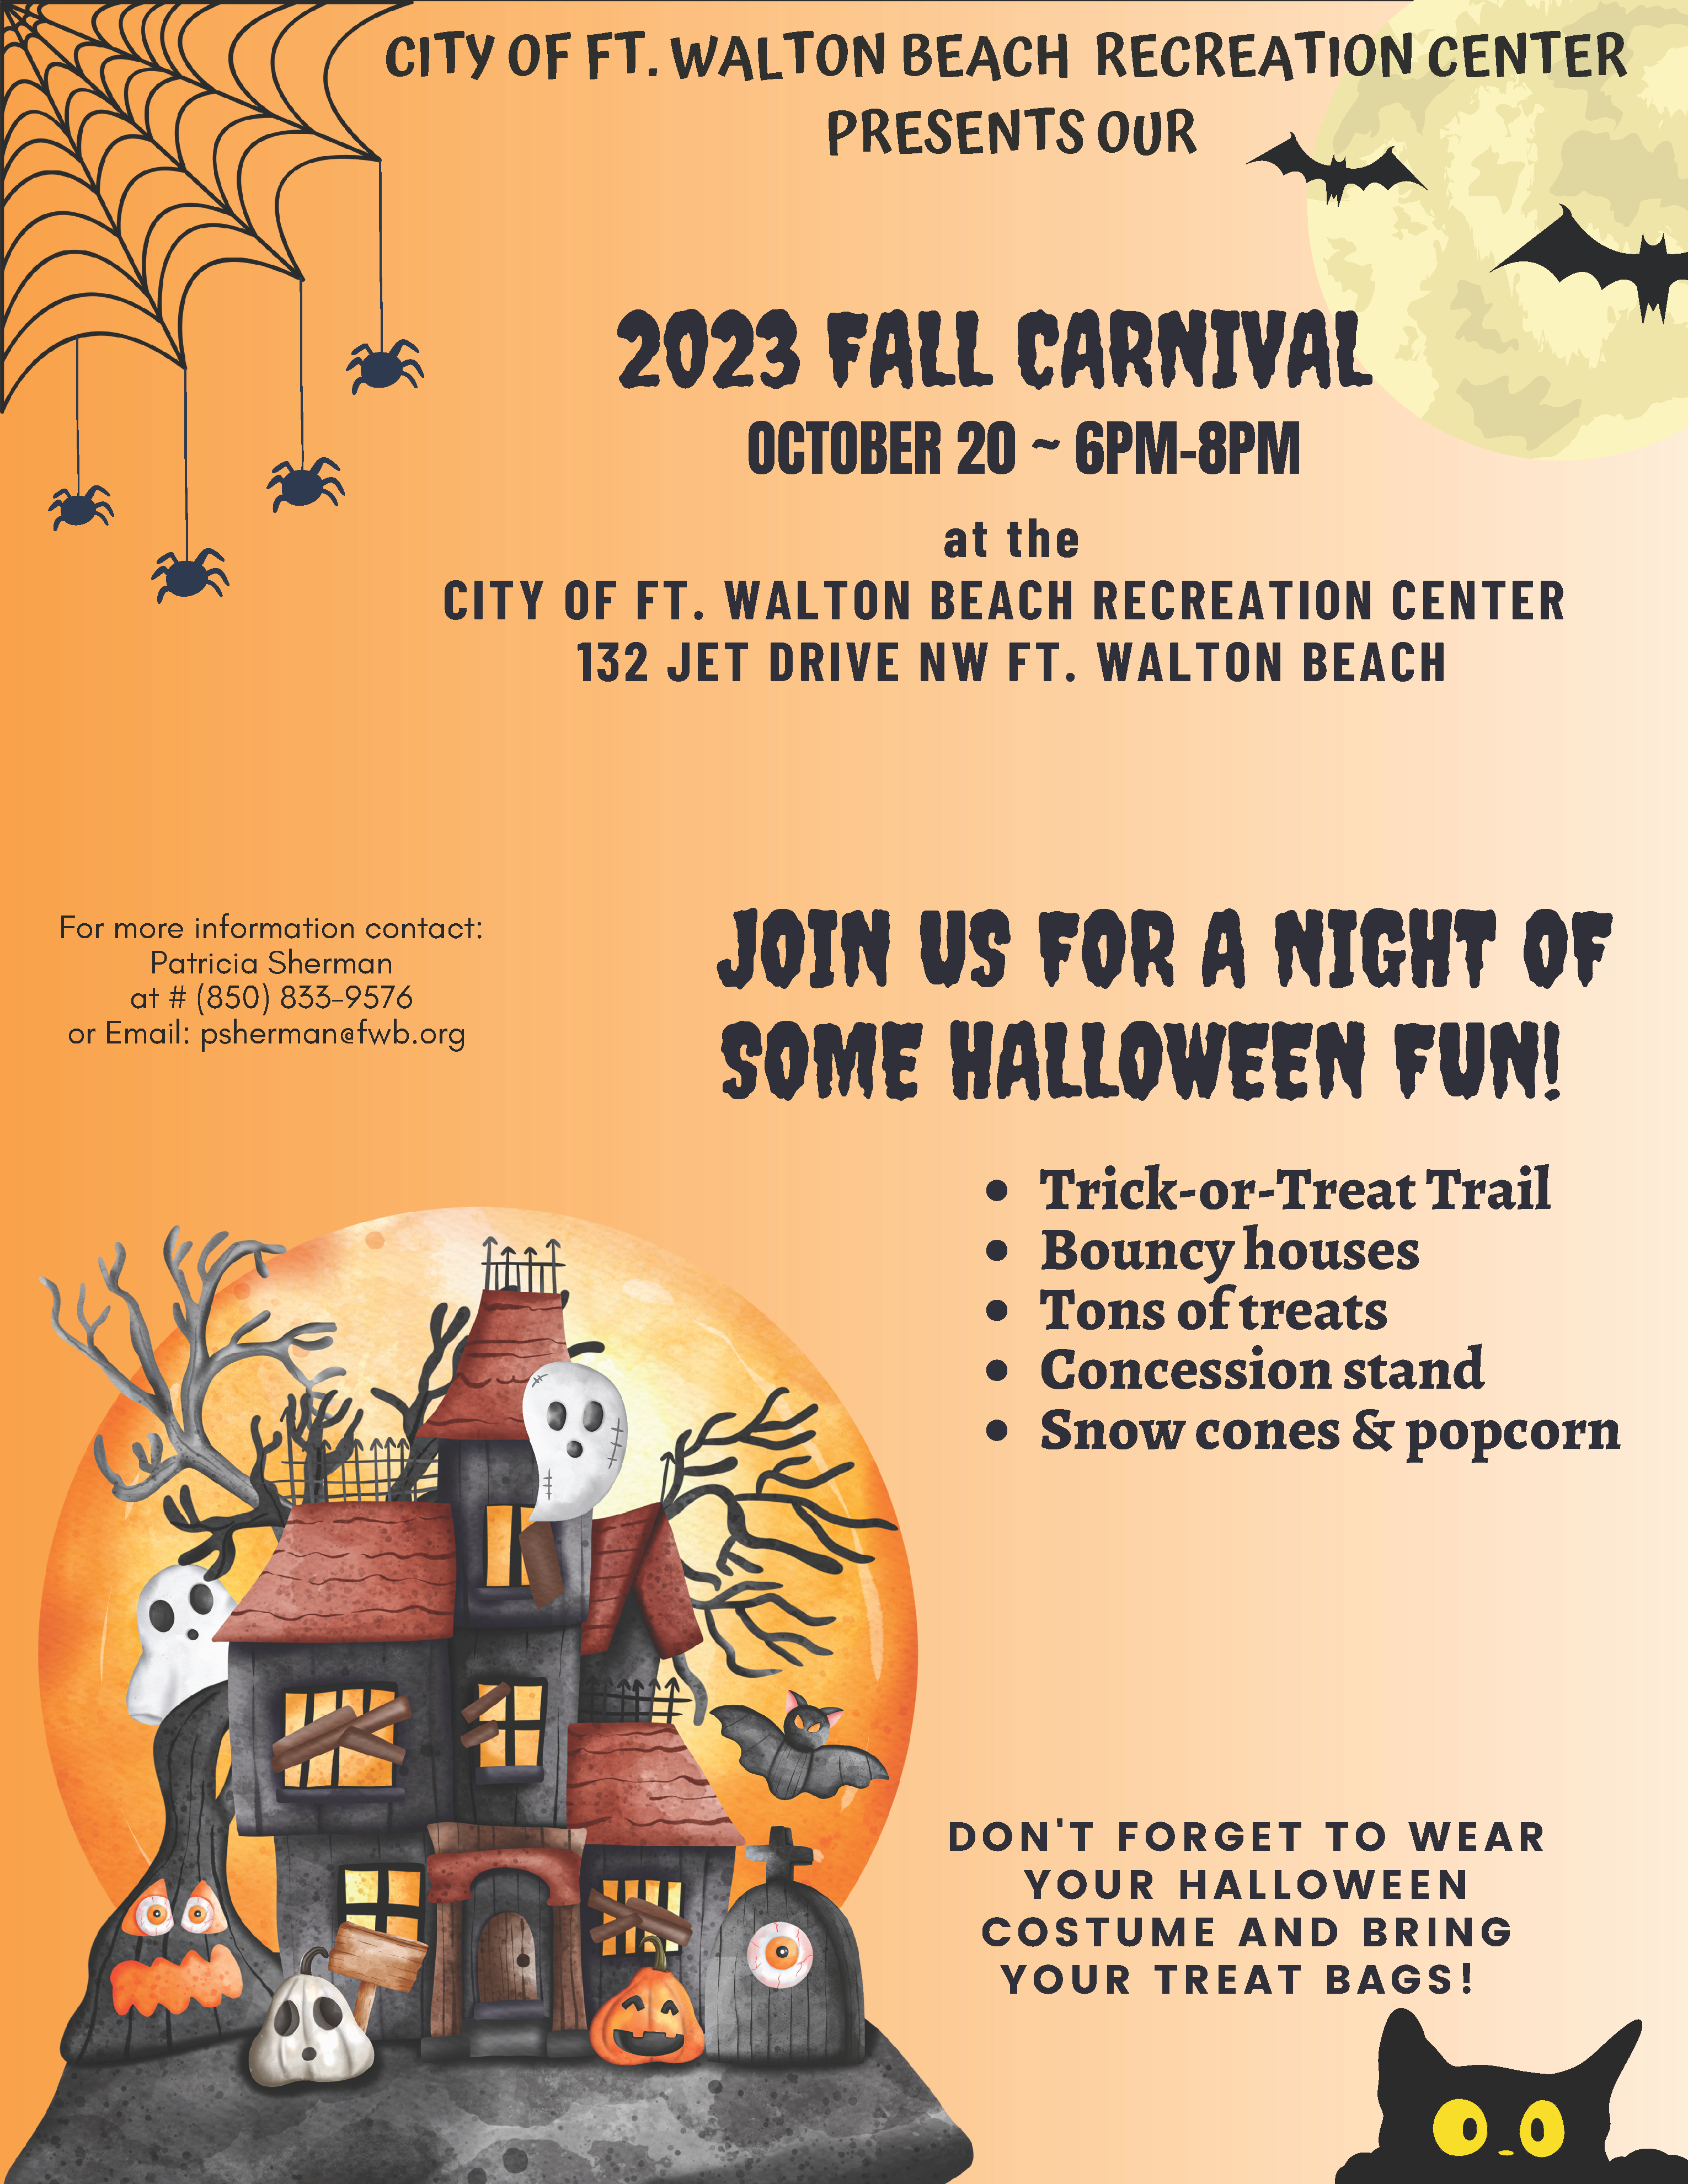 Fall Carnival at the City of Fort Walton Beach Recreation Center